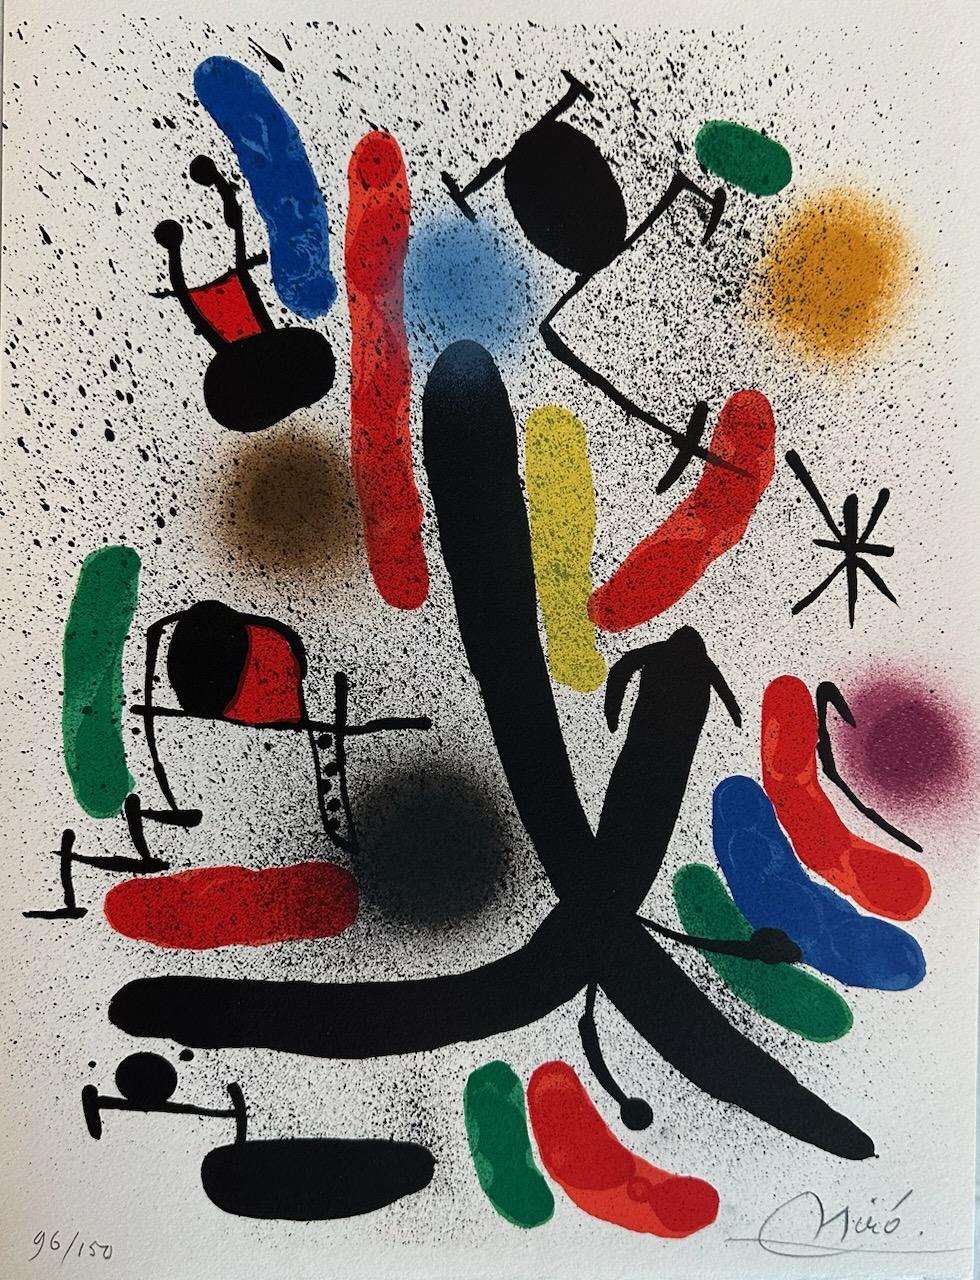 Joan Miró Abstract Print - Miro Lithograph I Hand-Signed Limited Edition Lithograph